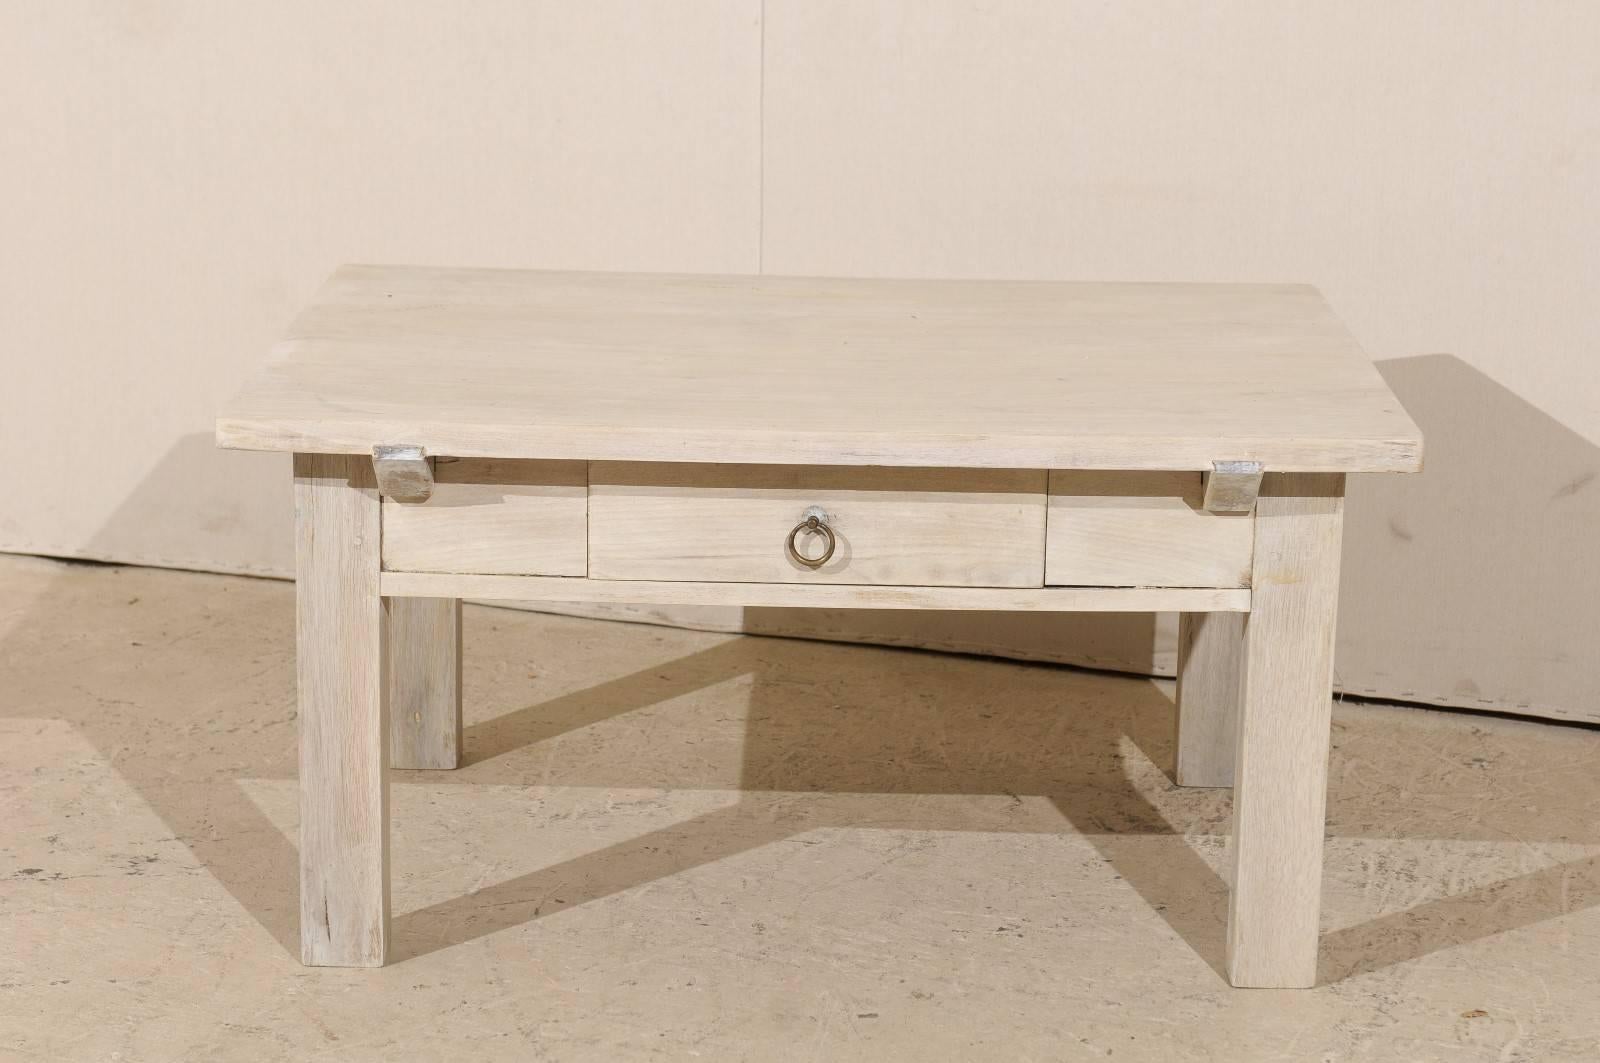 A Belgian wood coffee table with simple clean lines. This Belgian coffee table from the 1920s features a single drawer with a ring pull and straight legs. This coffee table with linear profile has a soft neutral cream color. This medium size piece